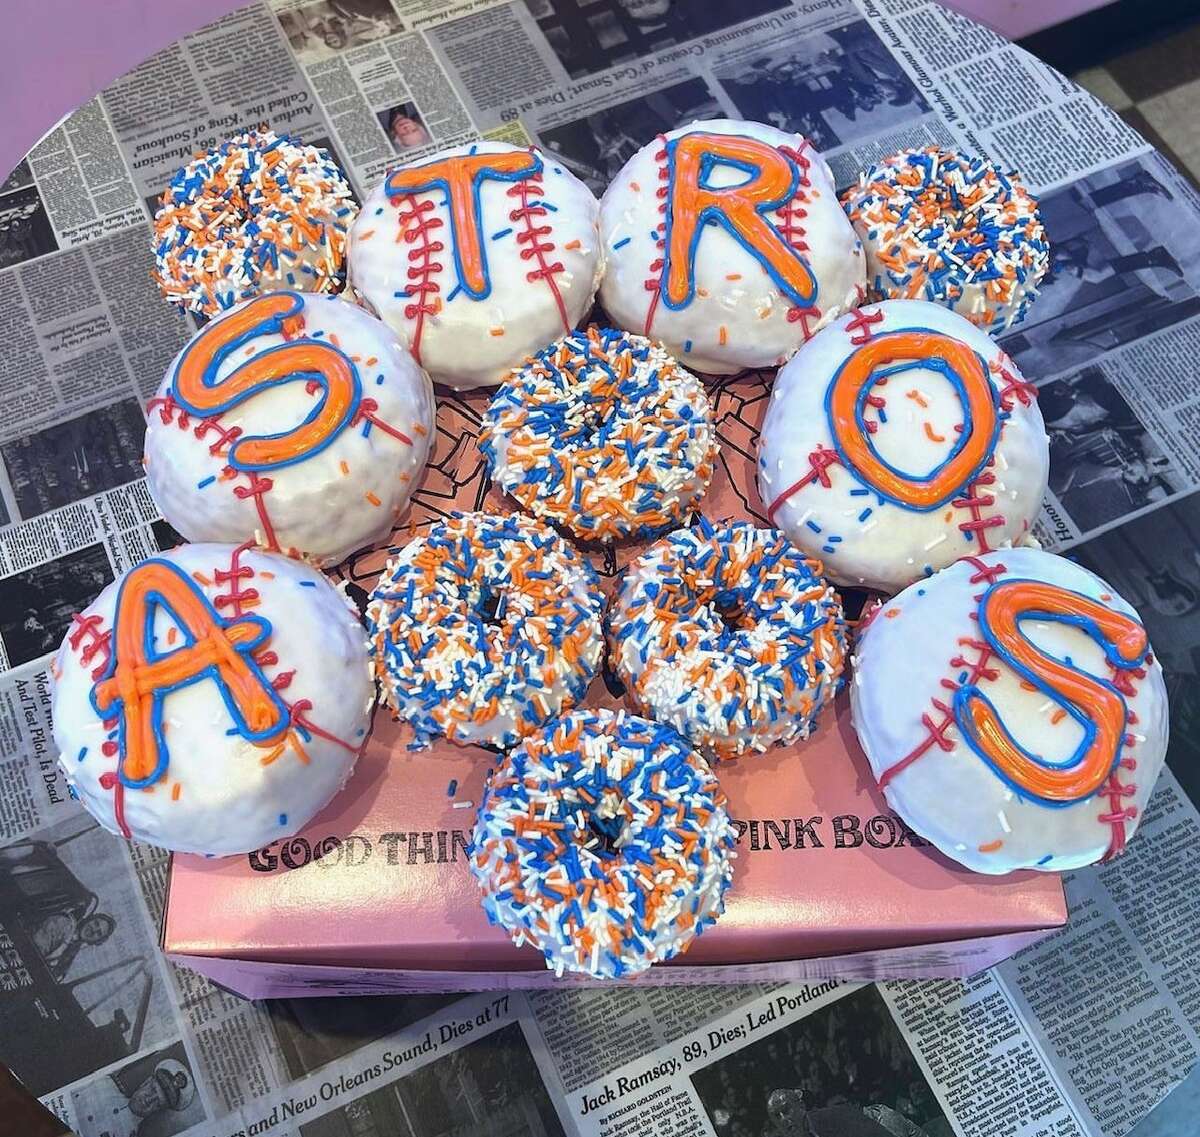 Voodoo Doughnut is selling Astros-themed sprinkle cakes as part of a World Series promotion at select stores. Each donut is 25 cents.